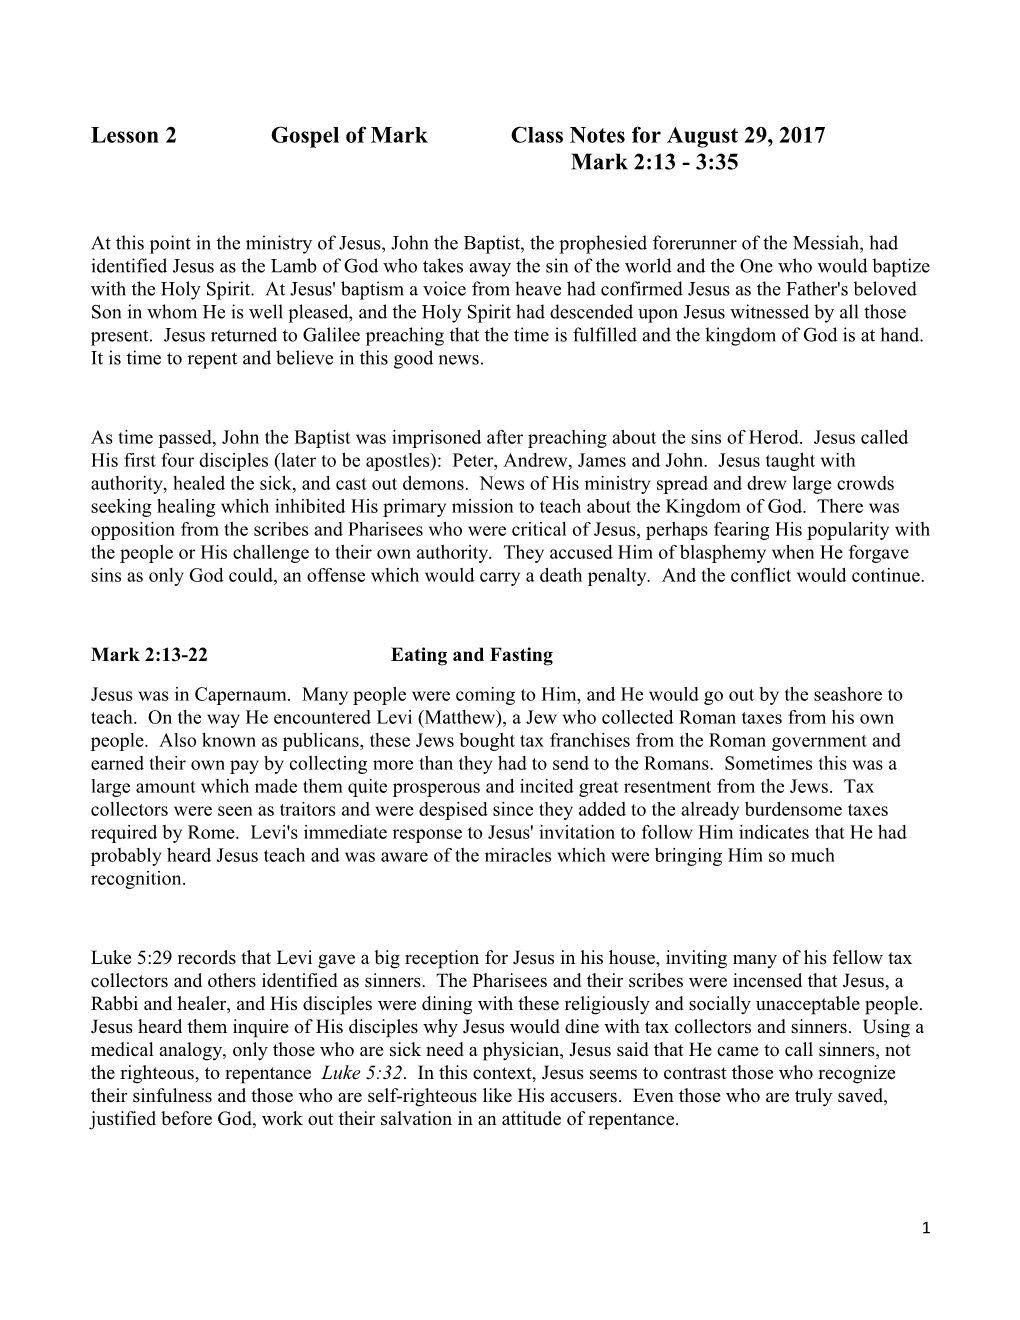 Lesson 2Gospel of Markclass Notes for August 29, 2017 Mark 2:13 - 3:35